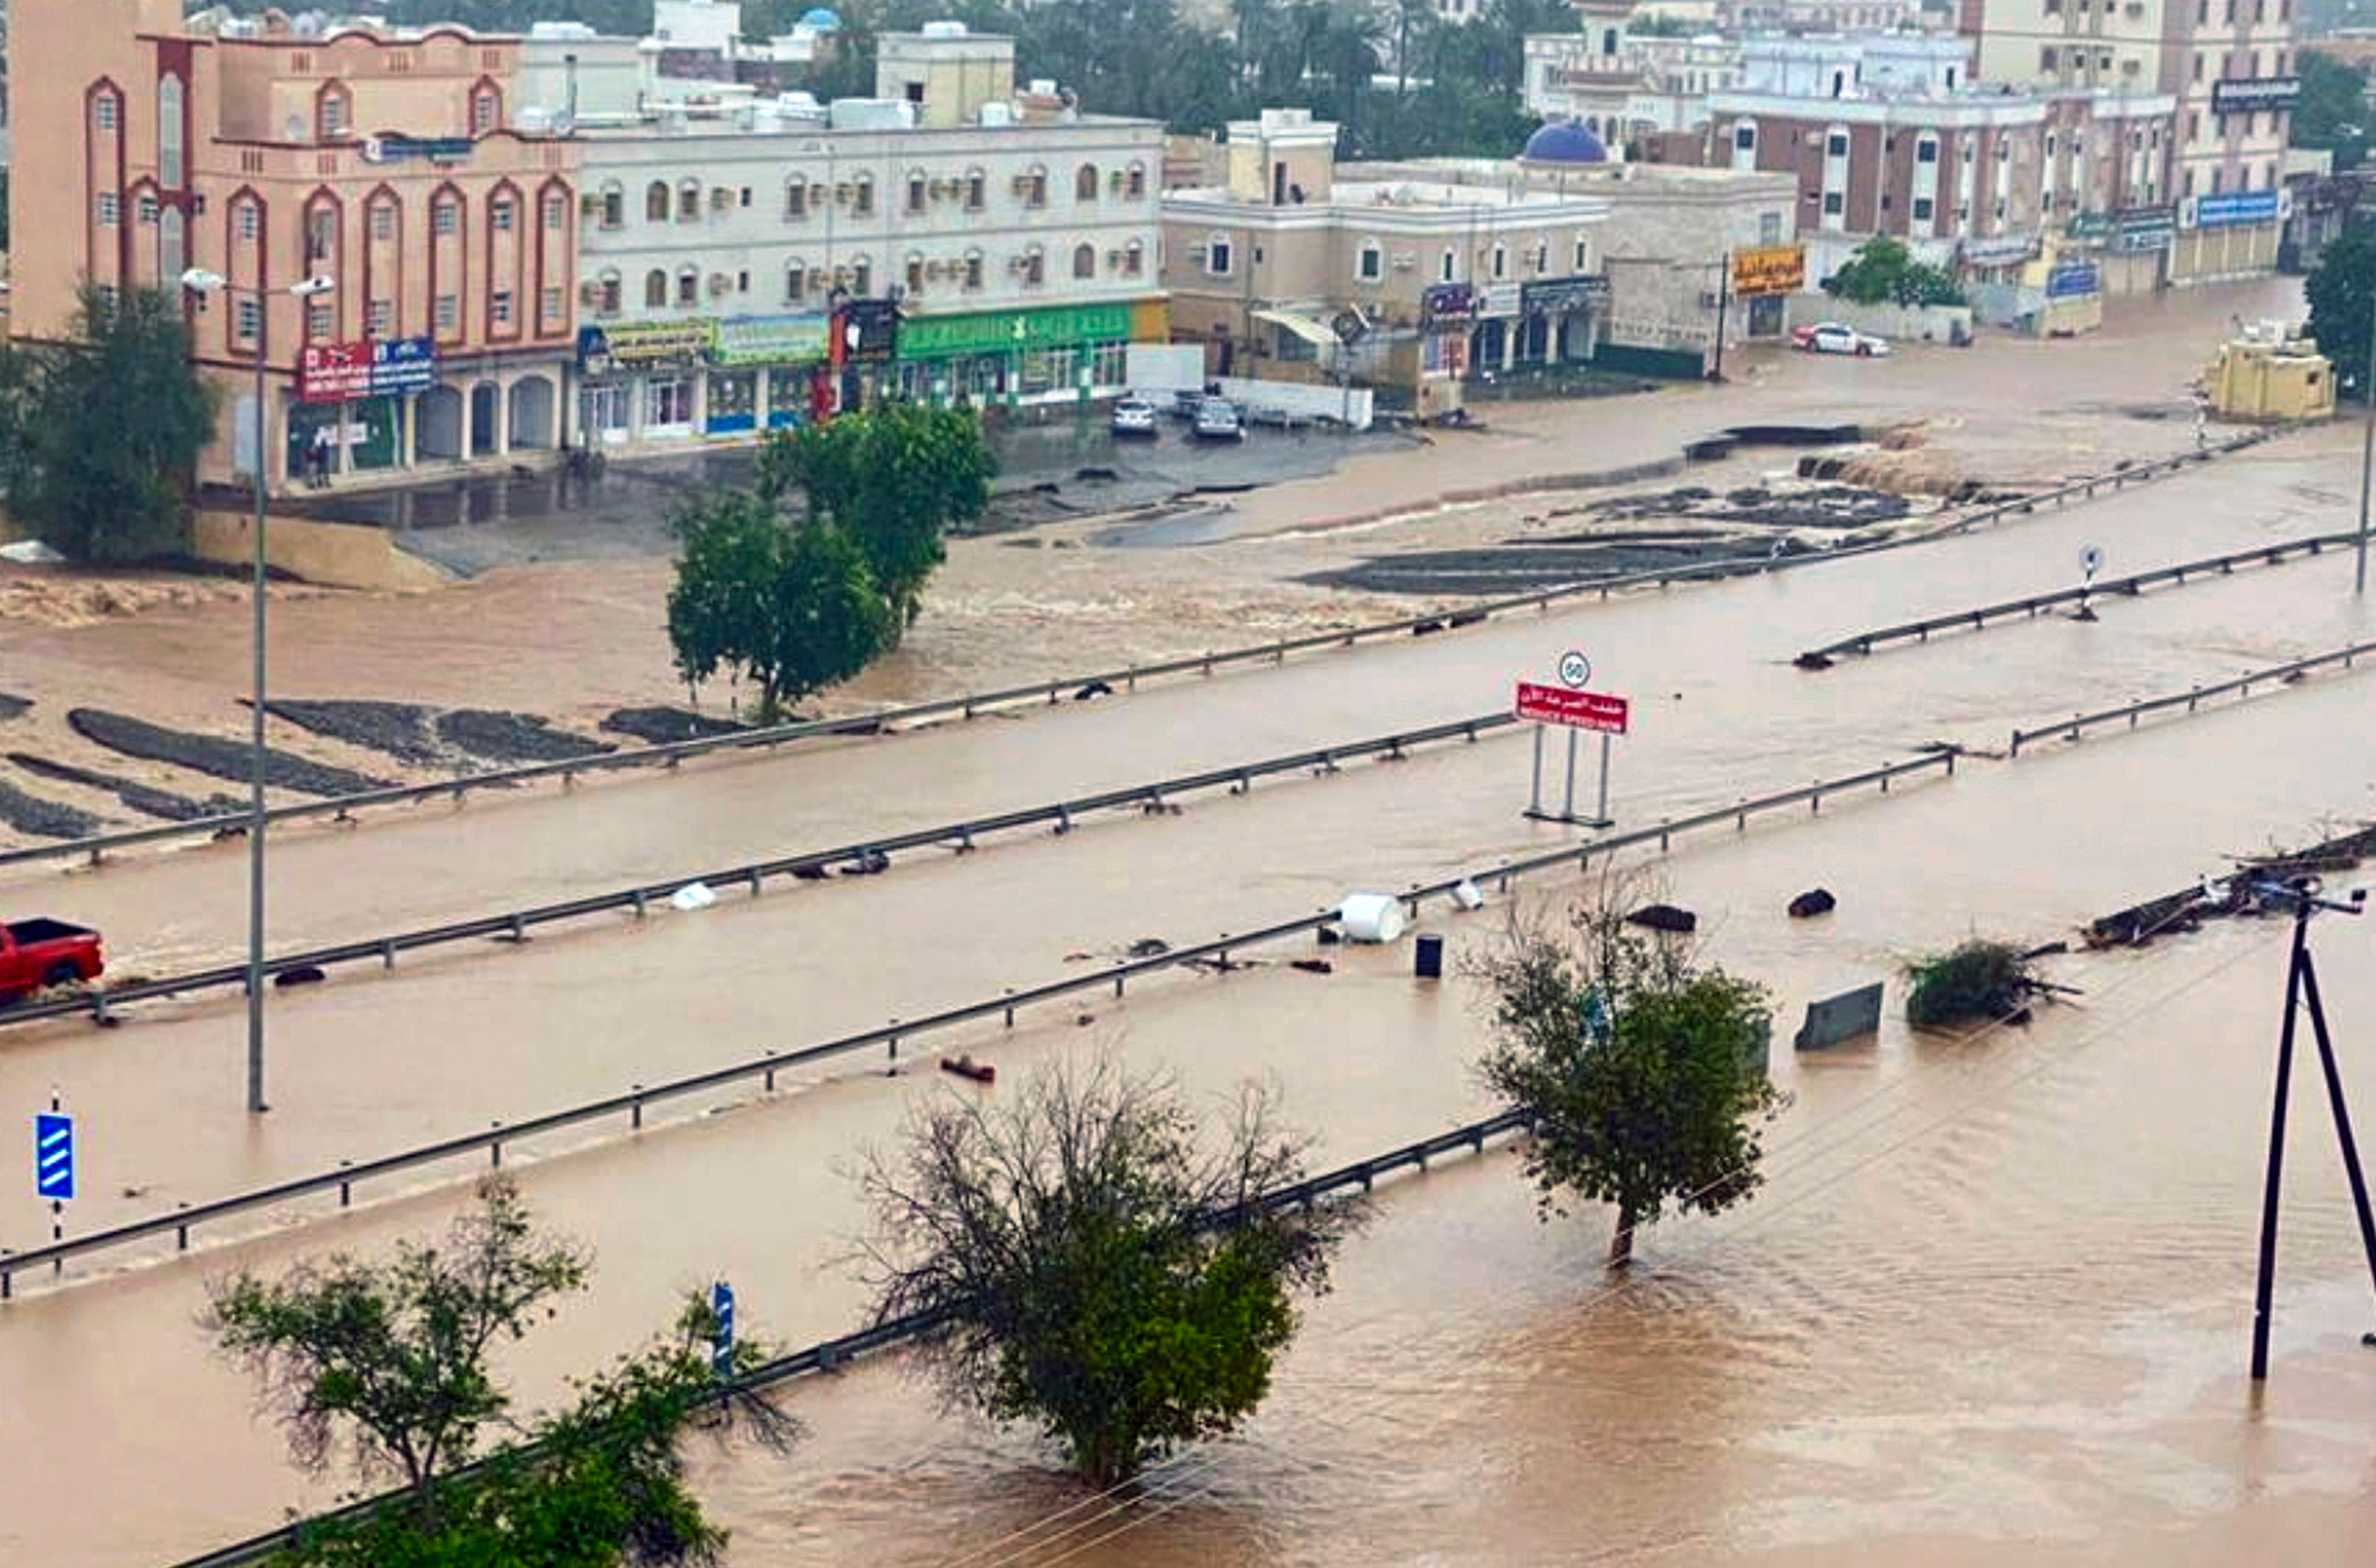 A tropical cyclone striking Oman and Iran killed 13 in October